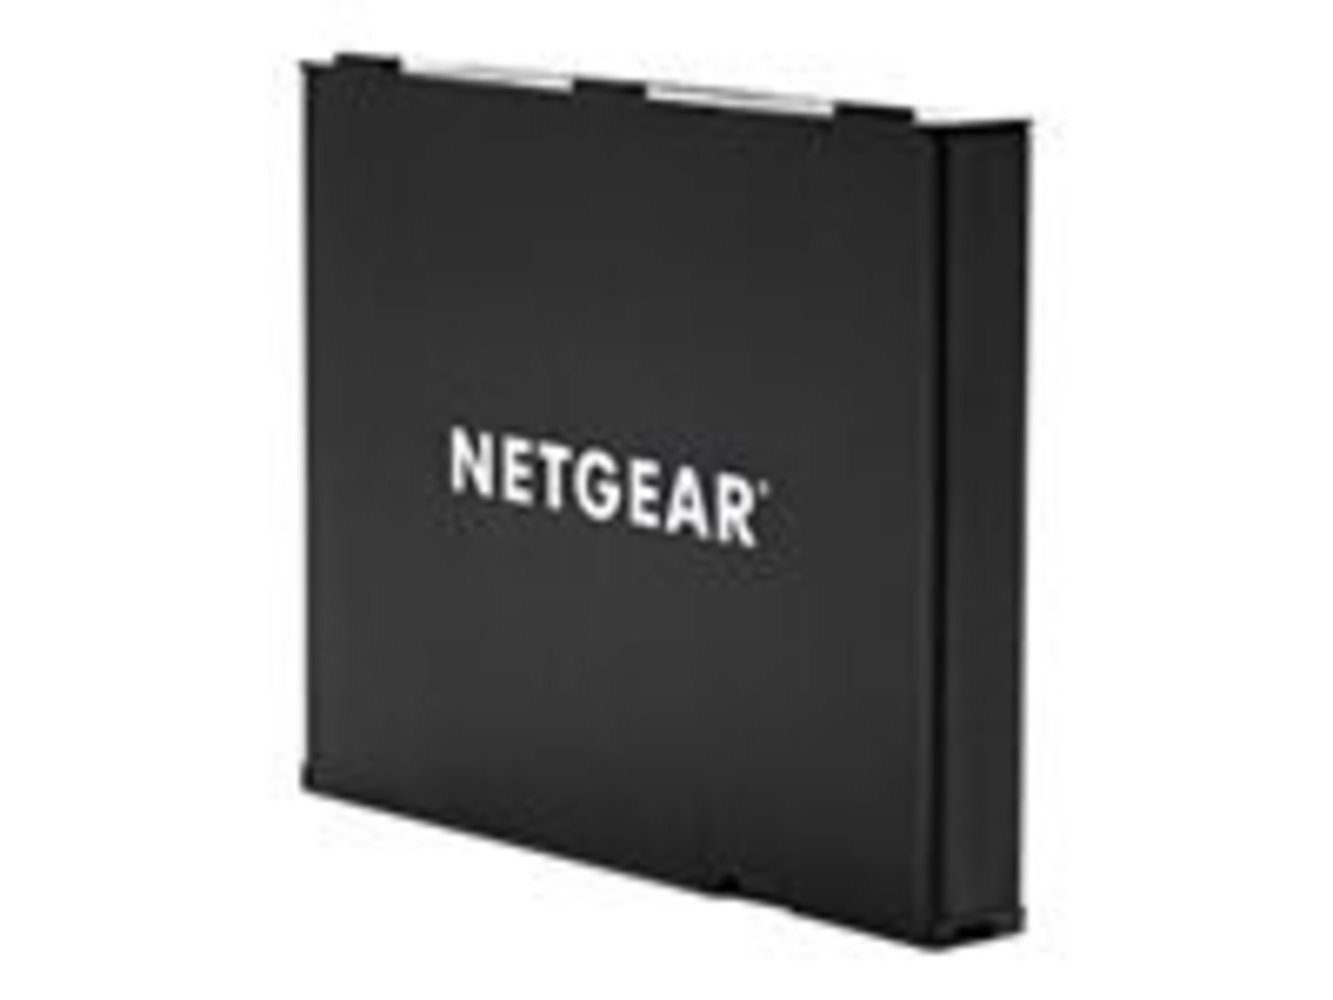 NETGEAR AirCard Mobile Hotspot Lithium Ion Replacement Battery